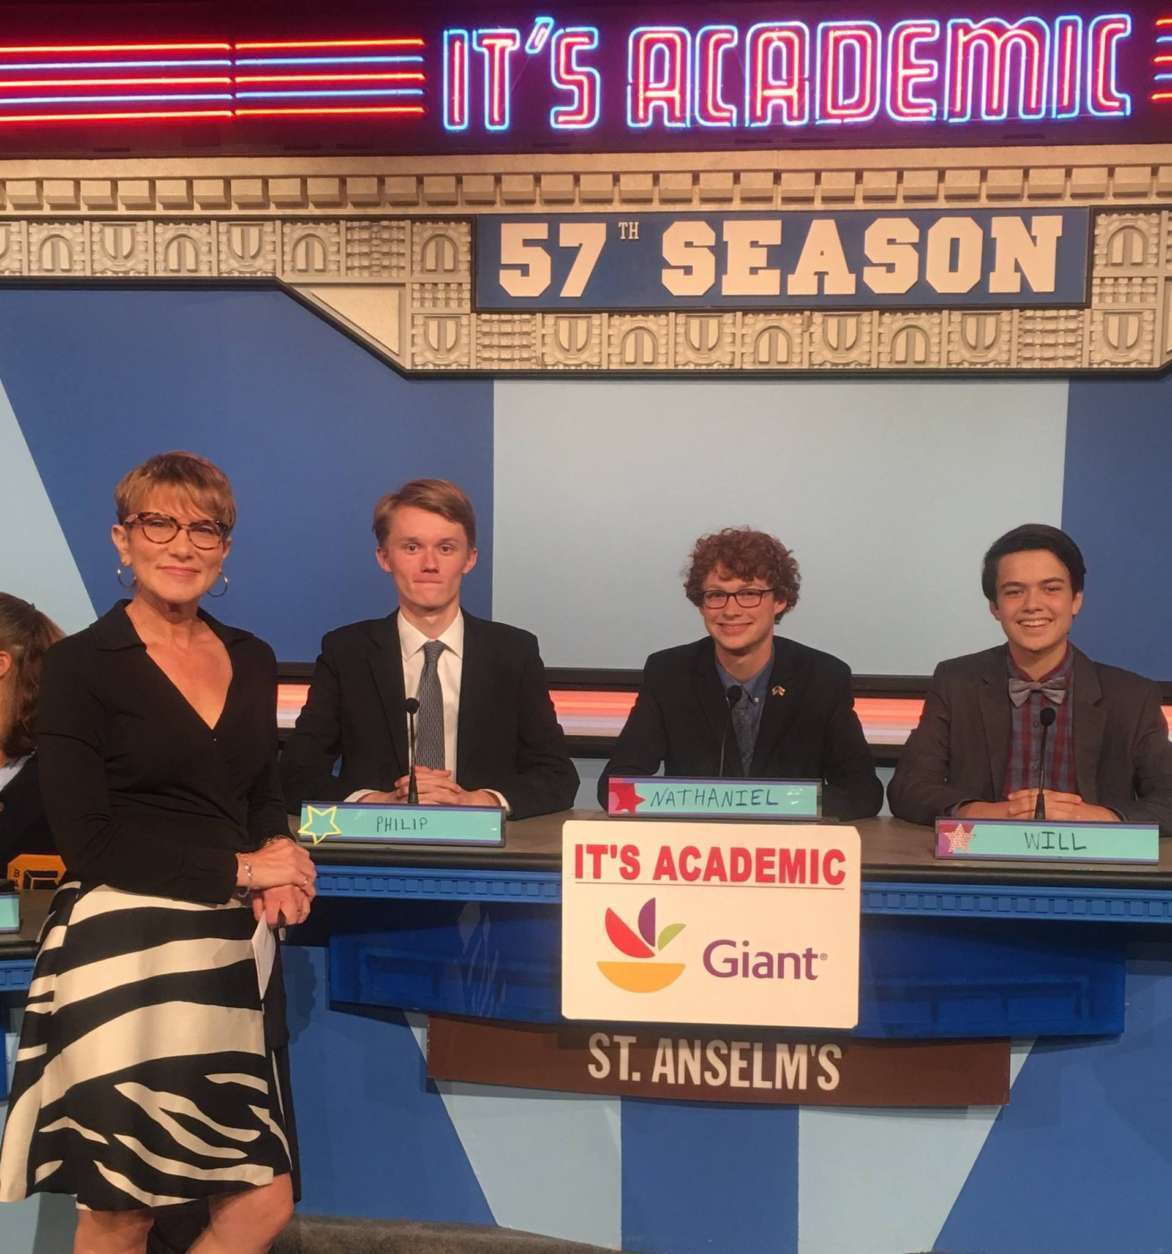 On "It's Academic," St. Anselm's won against Gaithersburg and Mount Vernon high schools. The show aired Oct. 28, 2017. (Courtesy Facebook/It's Academic)